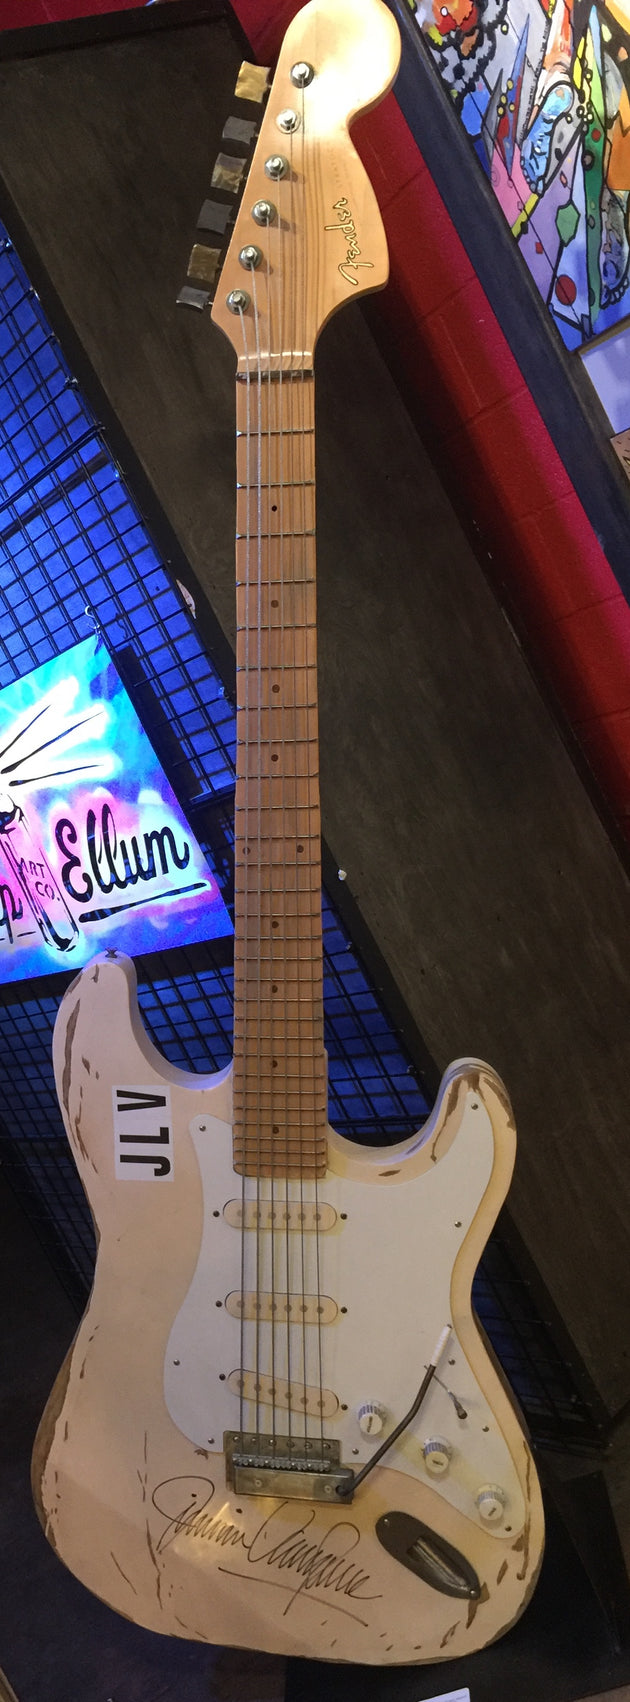 “Jimmy Vaughan’s Guitar, *signed* by Jimmie Vaughan, March 2016”” by James Bauer & Pascale Pryor